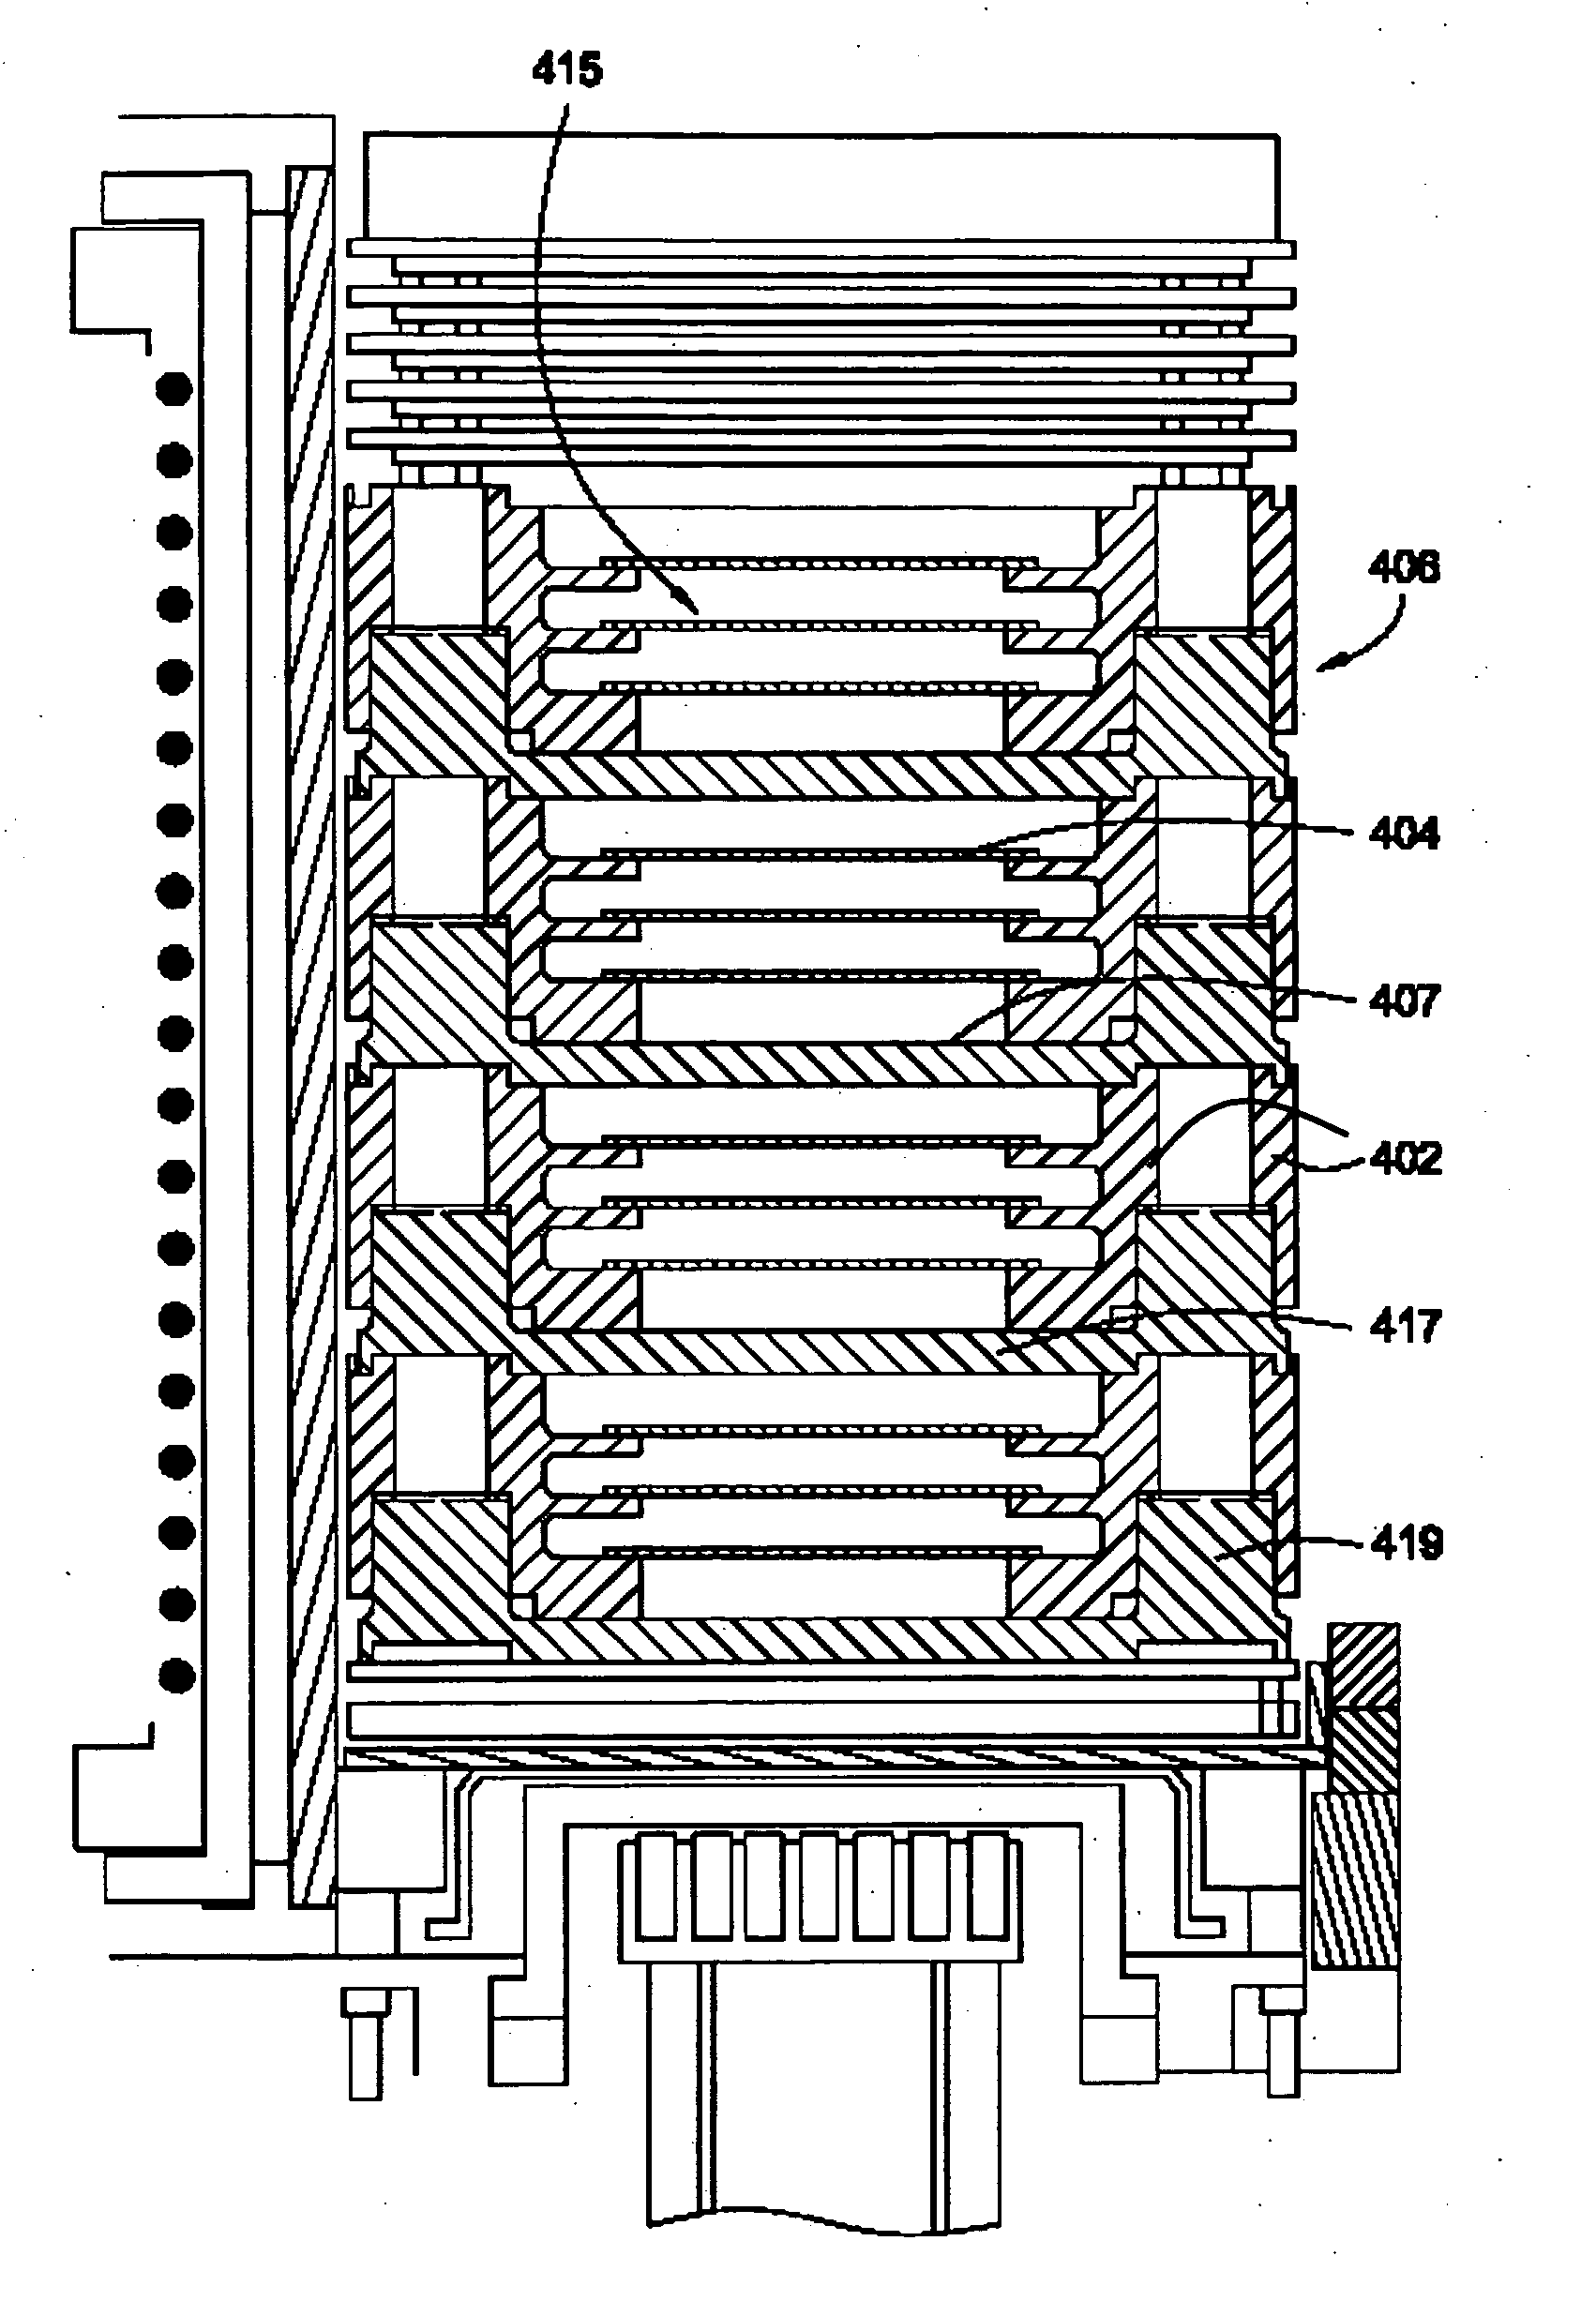 Substrate carrier for parallel wafer processing reactor